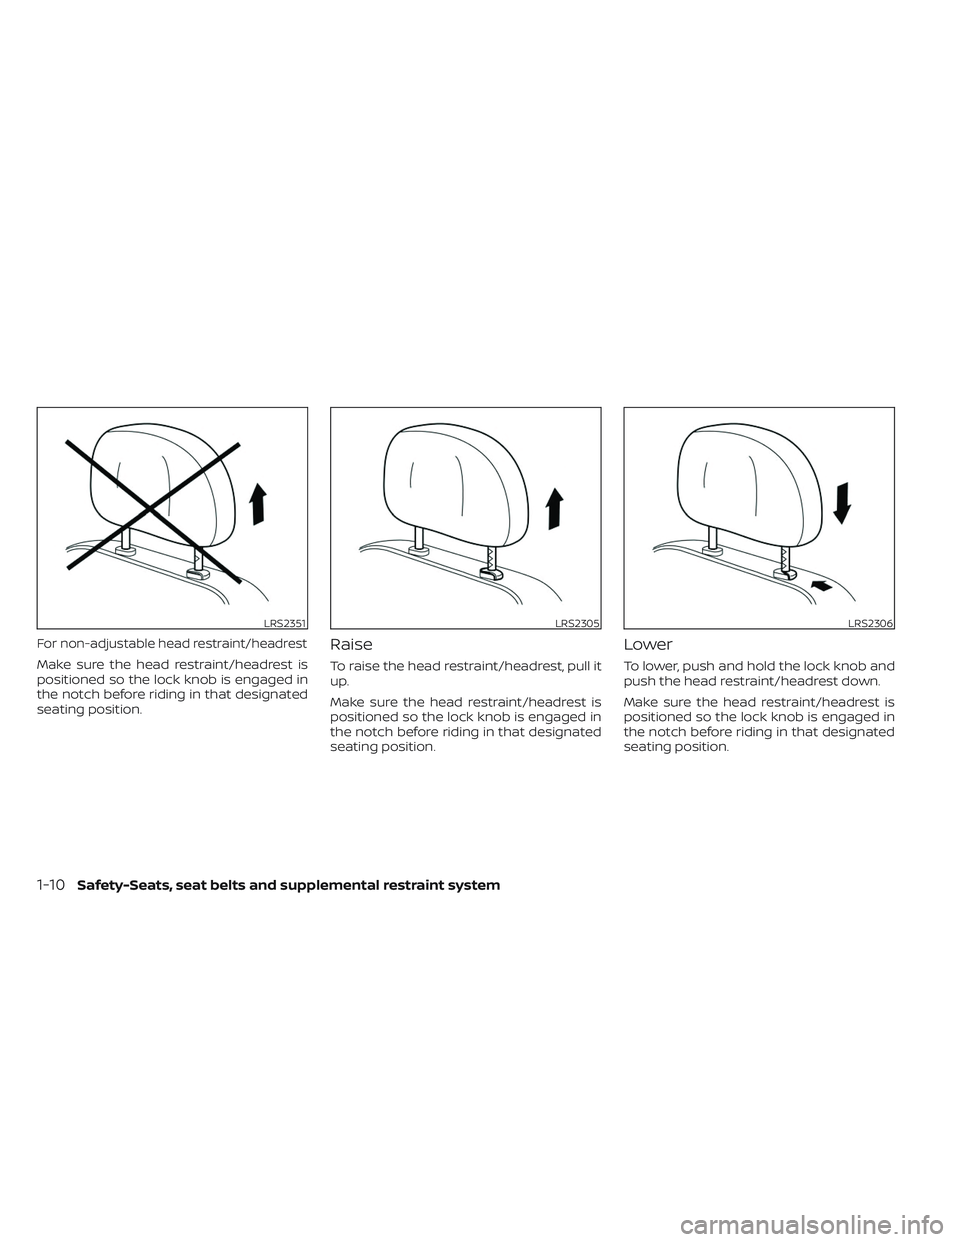 NISSAN MAXIMA 2023  Owners Manual For non-adjustable head restraint/headrest
Make sure the head restraint/headrest is
positioned so the lock knob is engaged in
the notch before riding in that designated
seating position.
Raise
To rais